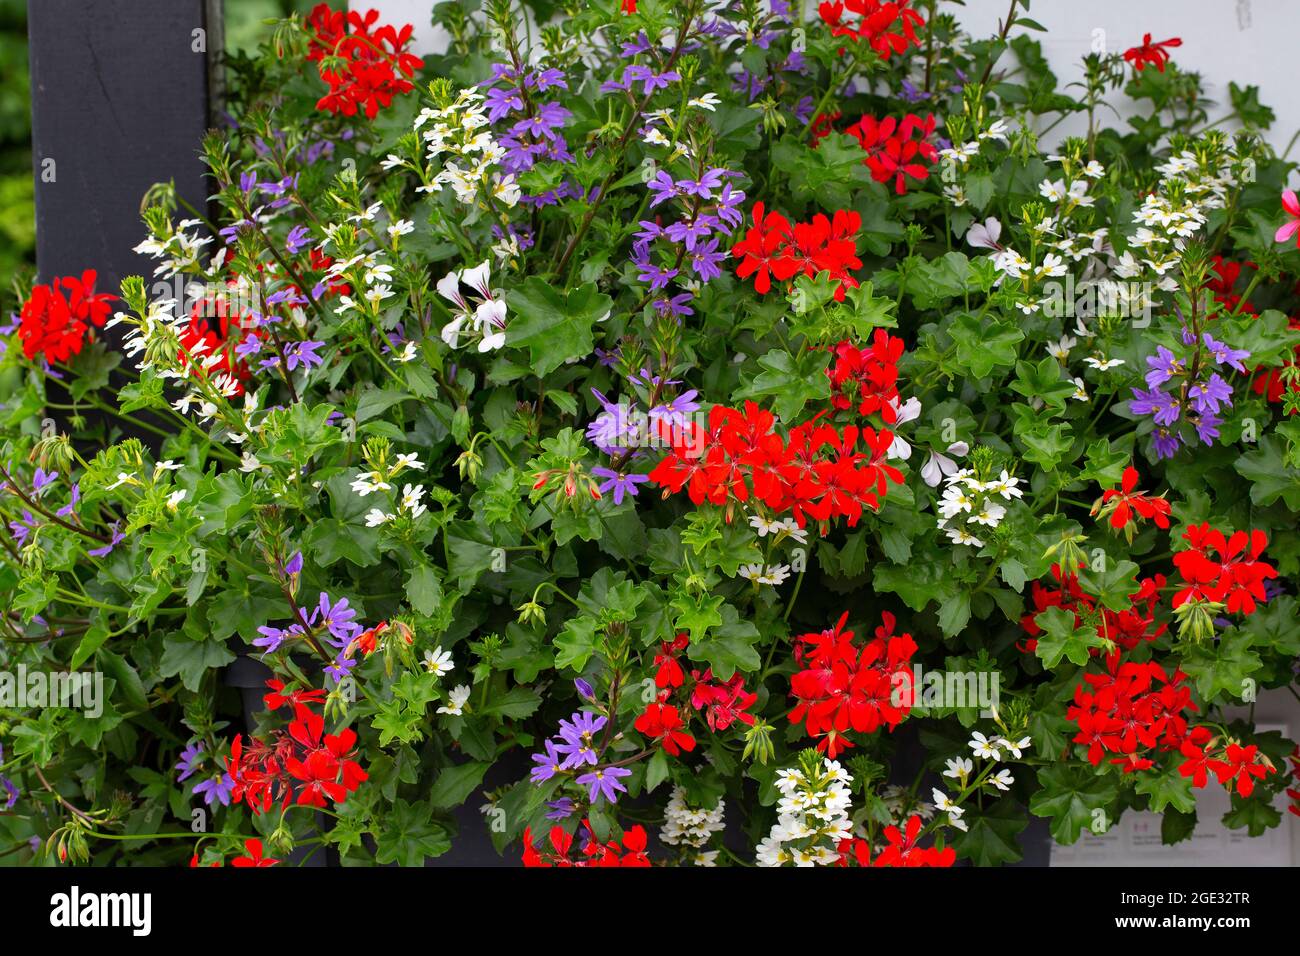 Basket with colorful mix of flowering  garden plants Stock Photo